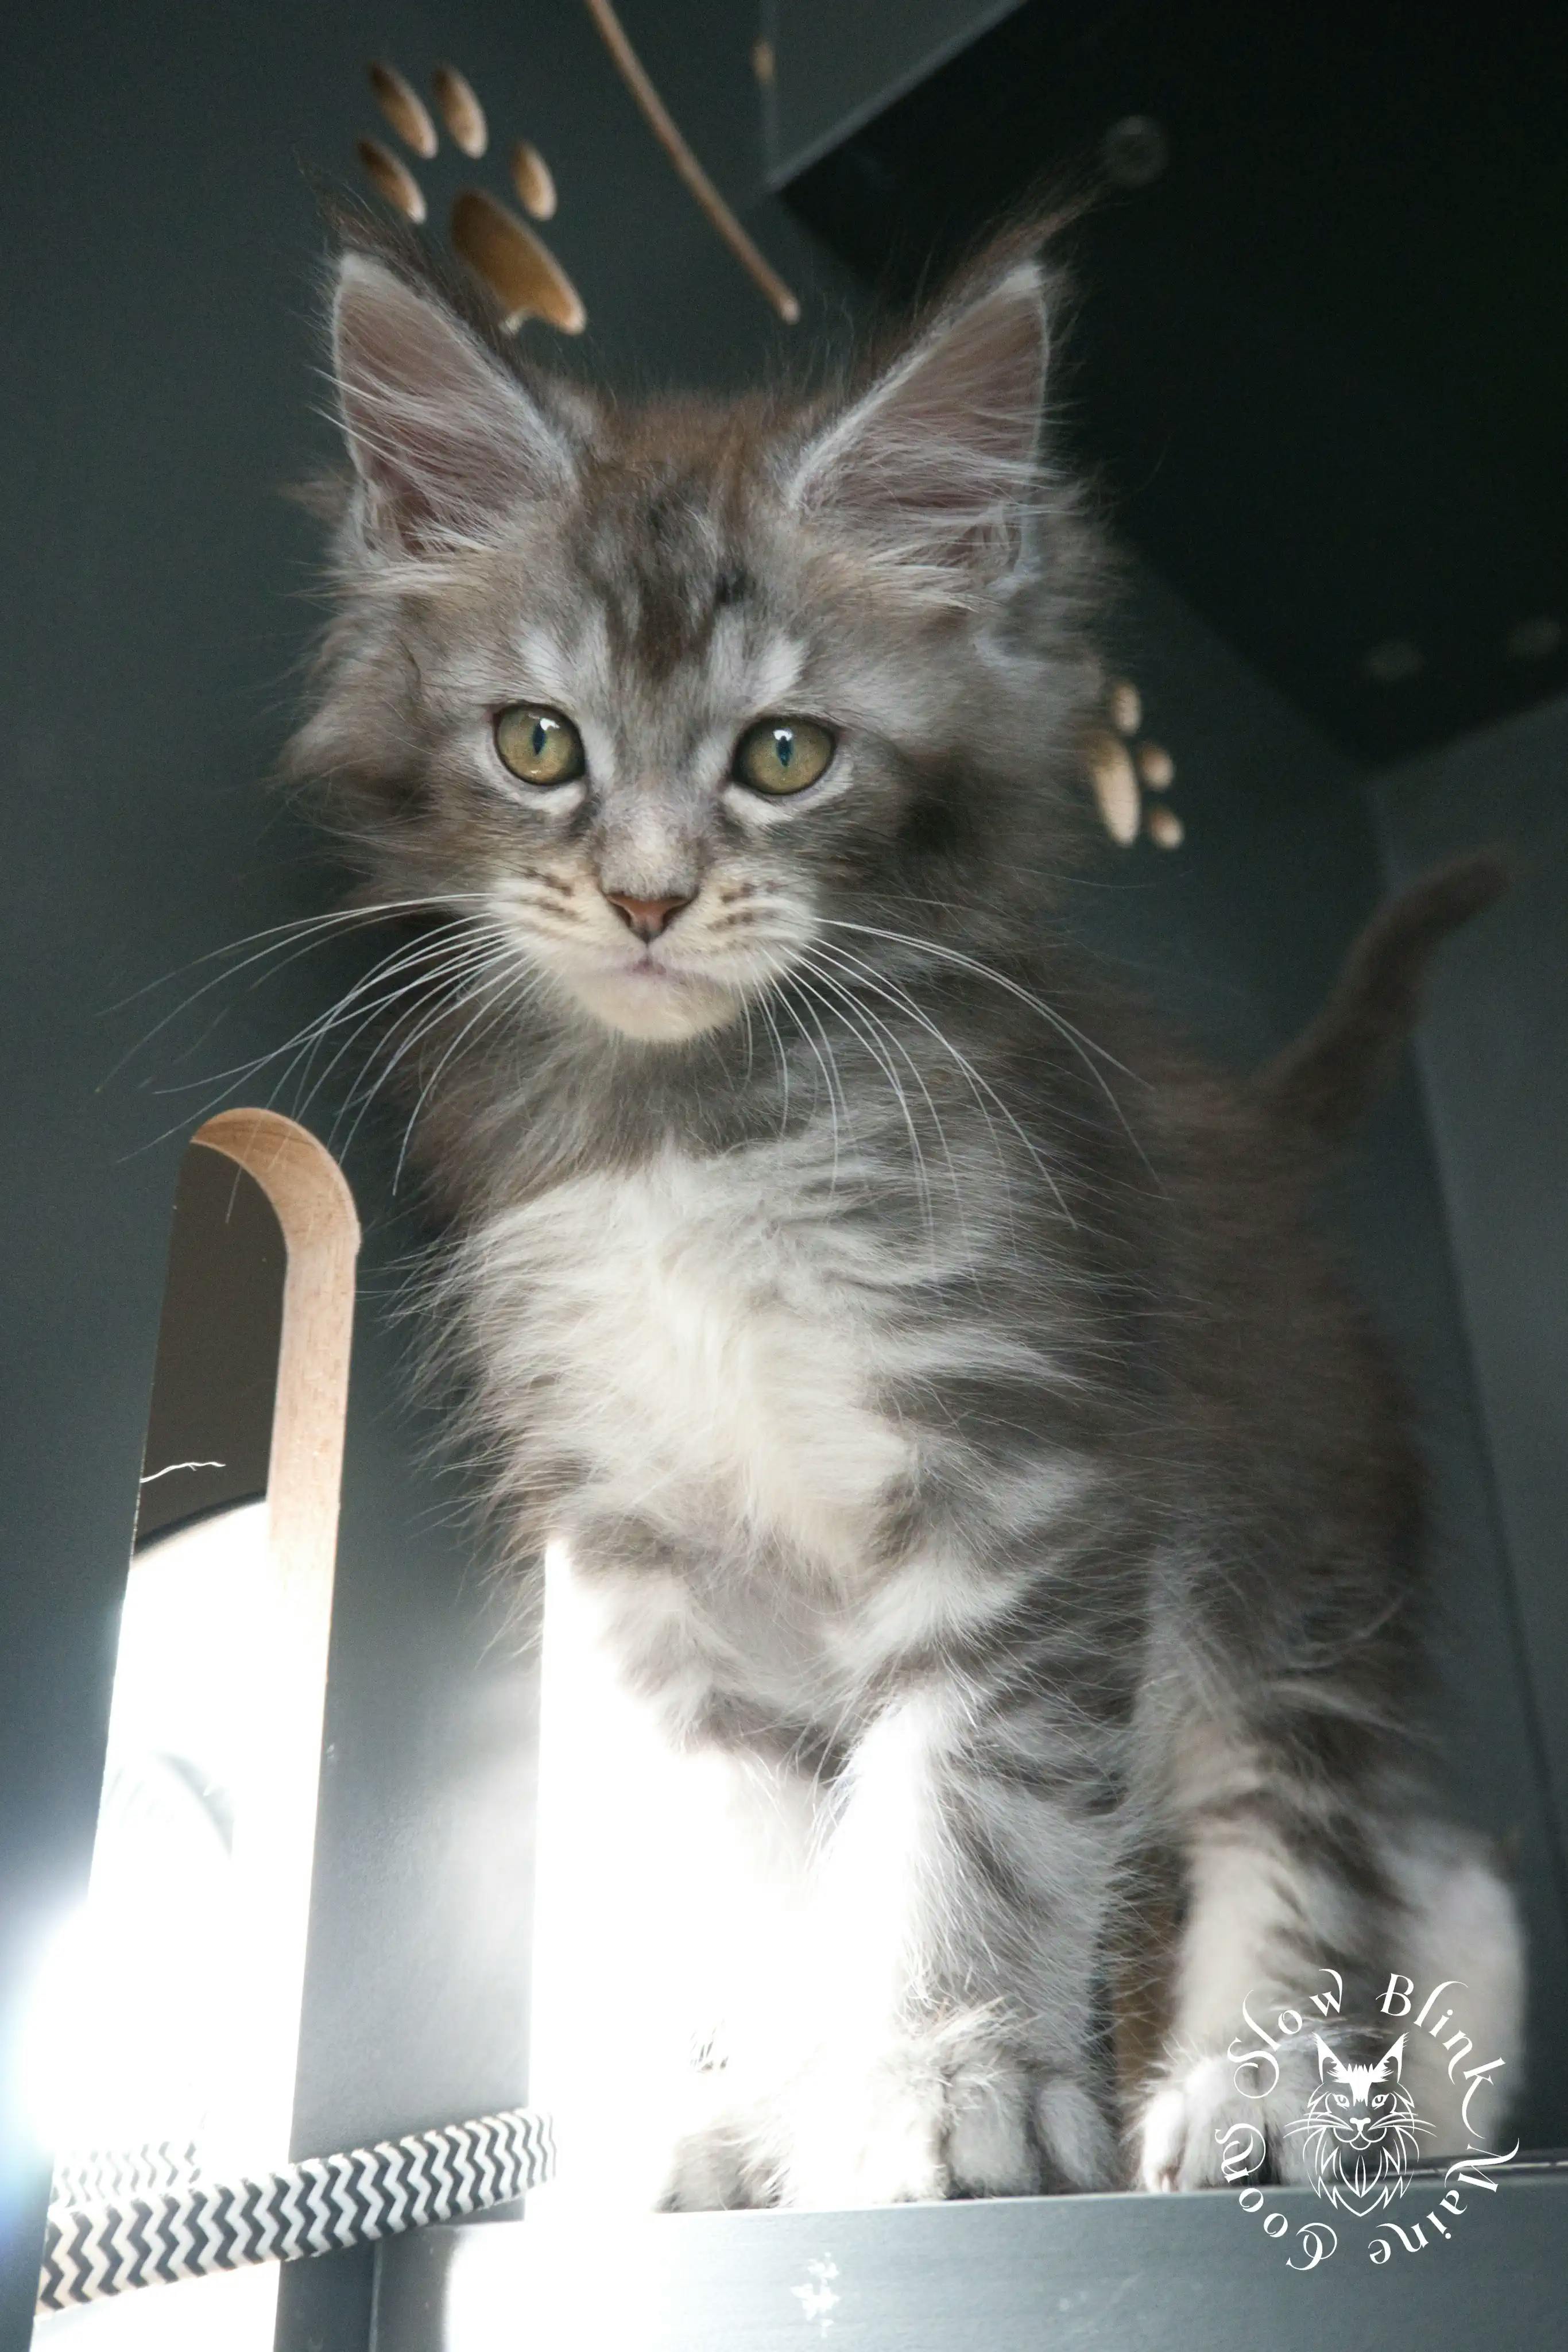 Blue Silver Tabby Maine Coon Kittens > blue silver tabby maine coon kitten | slowblinkmainecoons | 143